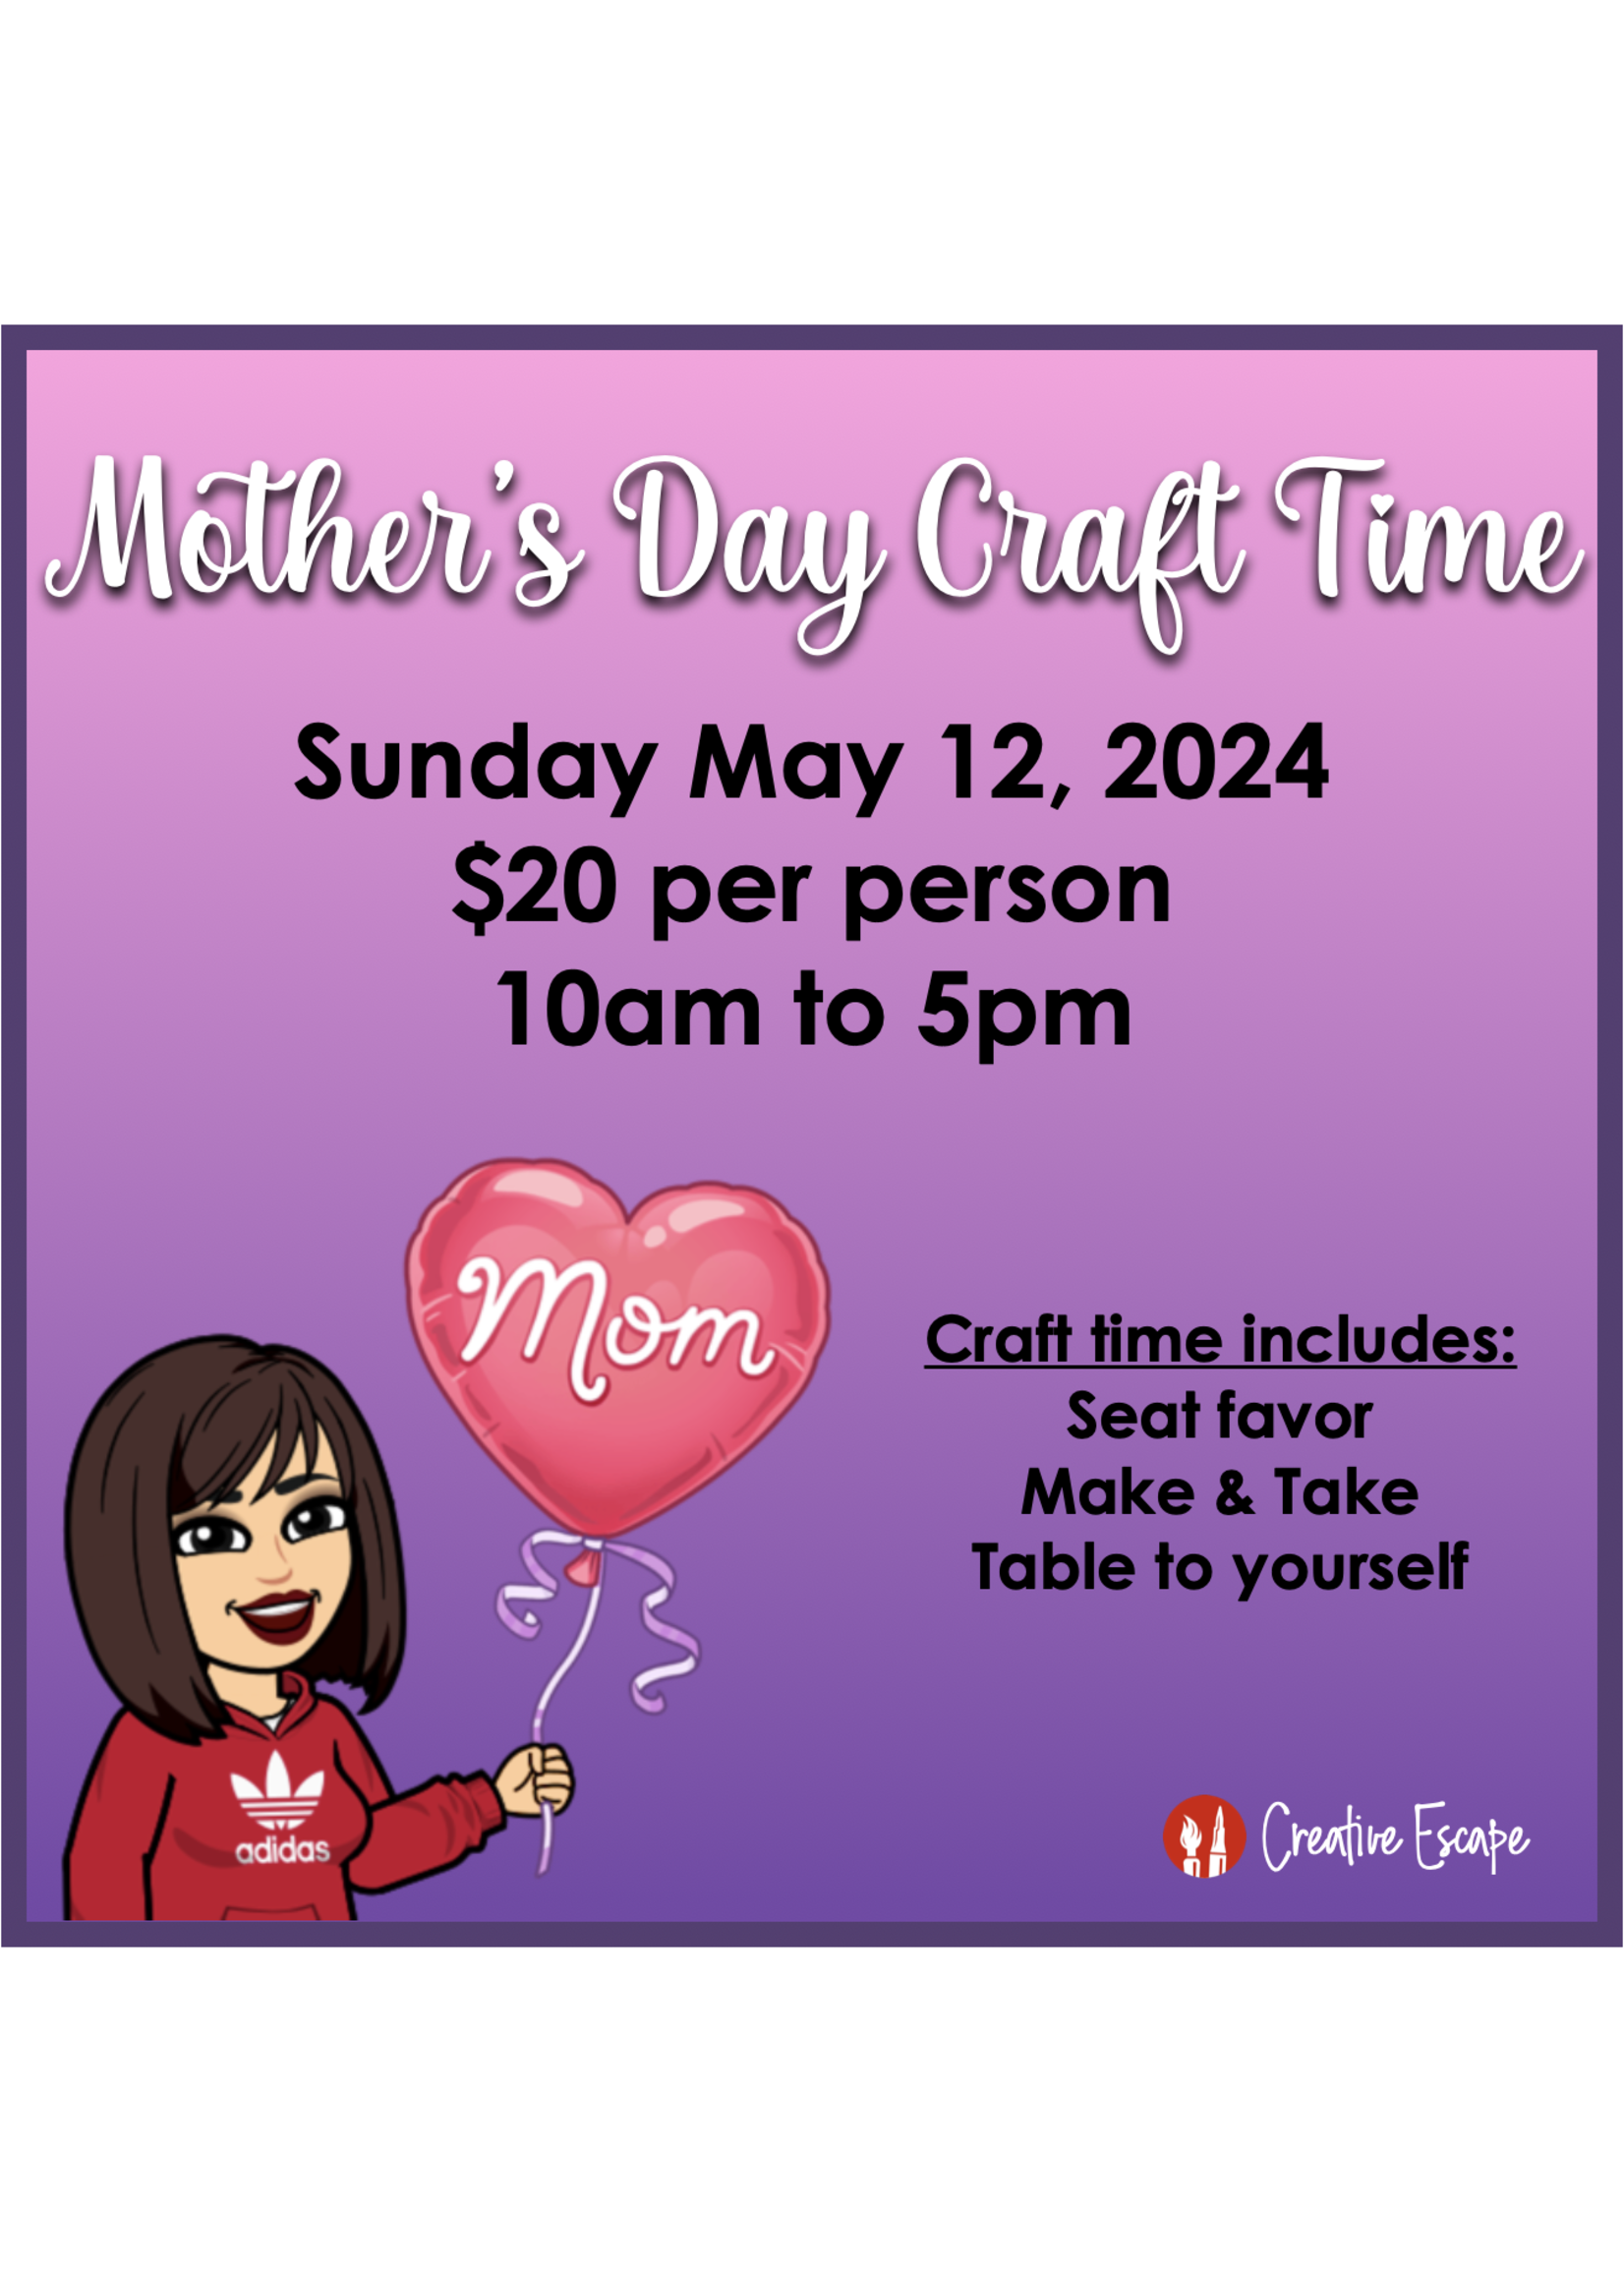 Mother's Day Craft Time